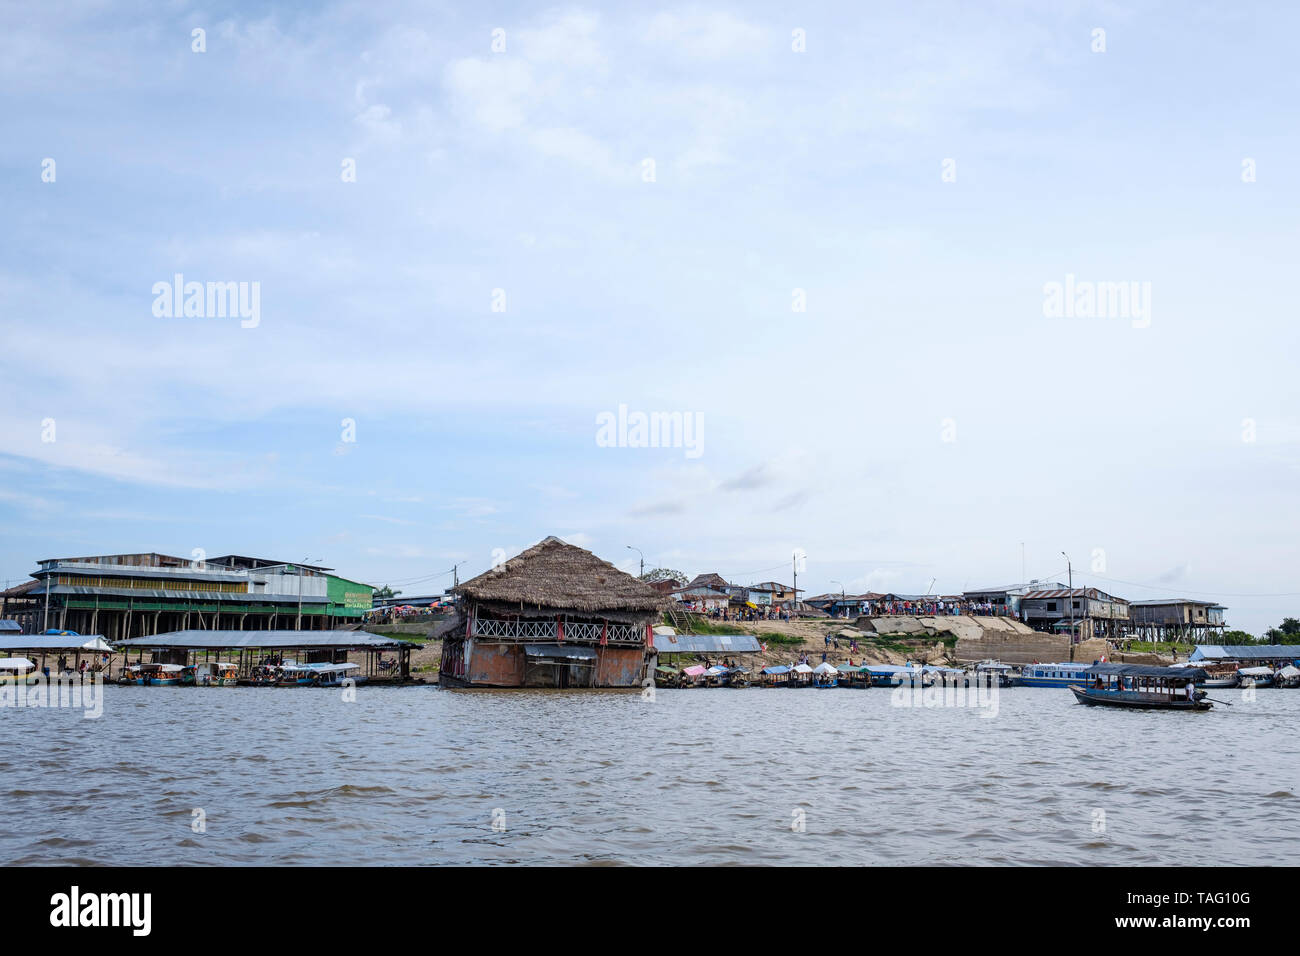 General view of the Bellavista Nanay Port on Iquitos In the Peruvian Amazon Basin, Maynas Province, Loreto Department, Peru Stock Photo